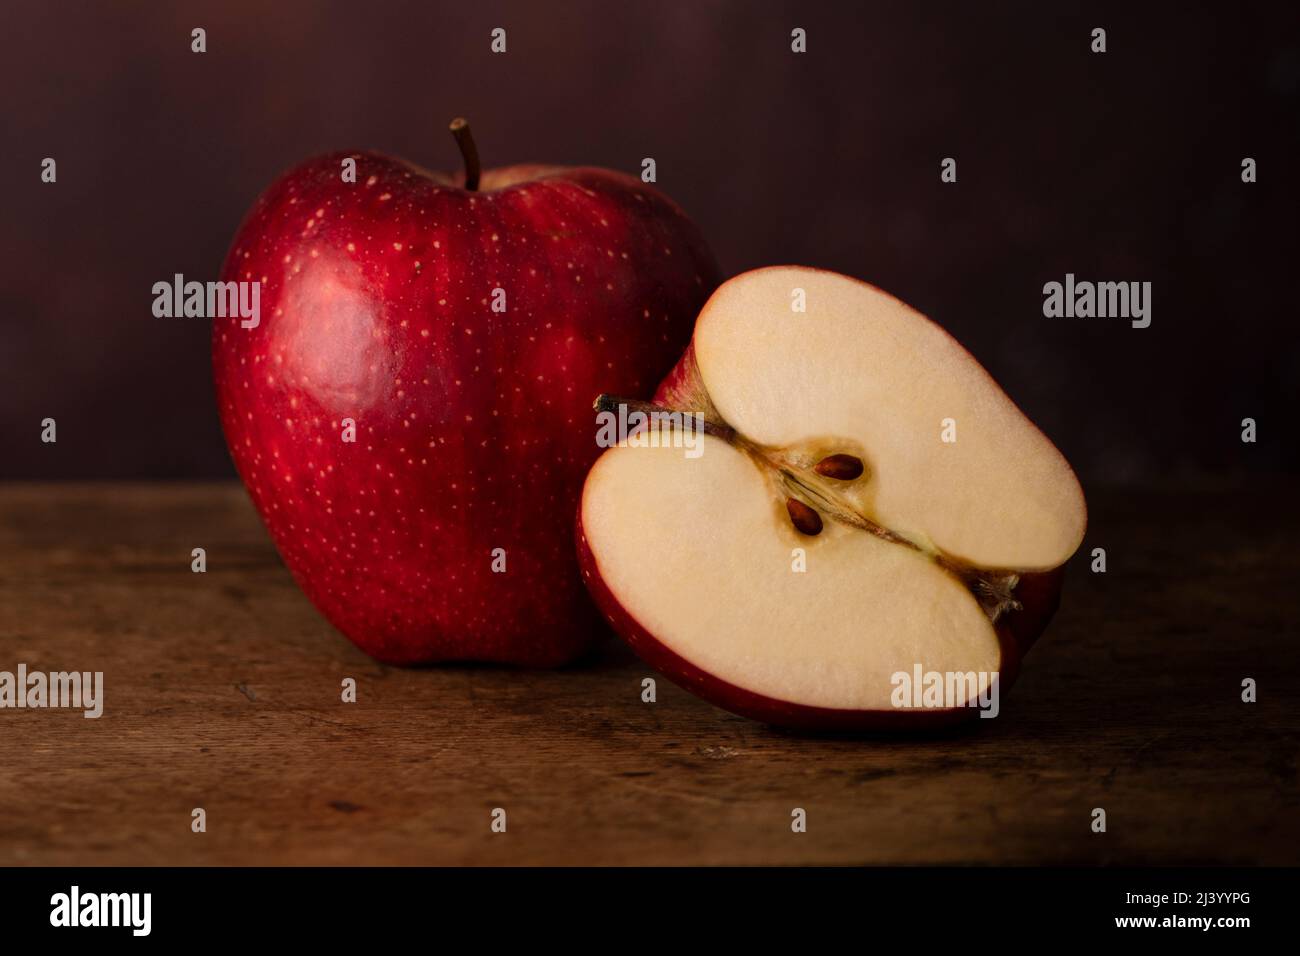 One Whole Apple and One Half Apple on a Wooden Old Surface. Stock Photo